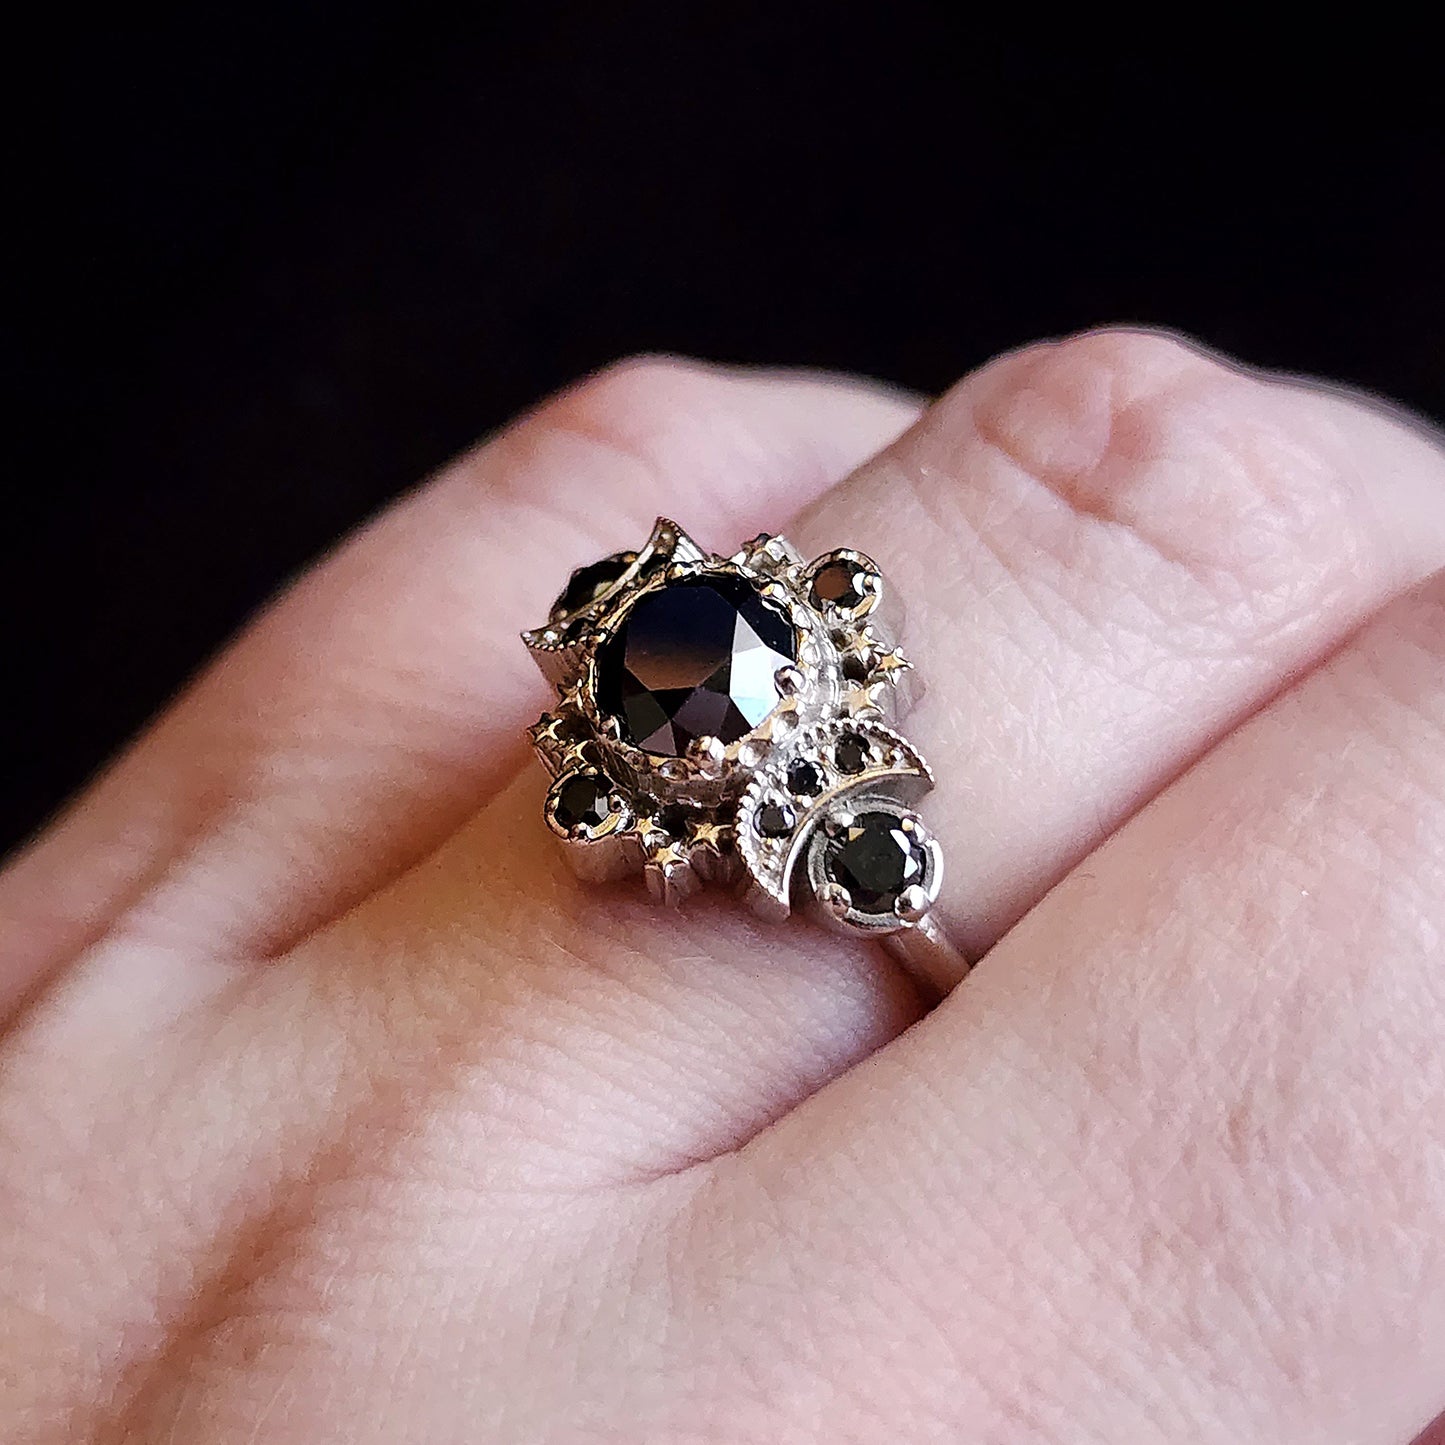 black diamond cosmos engagement ring triple moon with stars gothic victorian jewelry